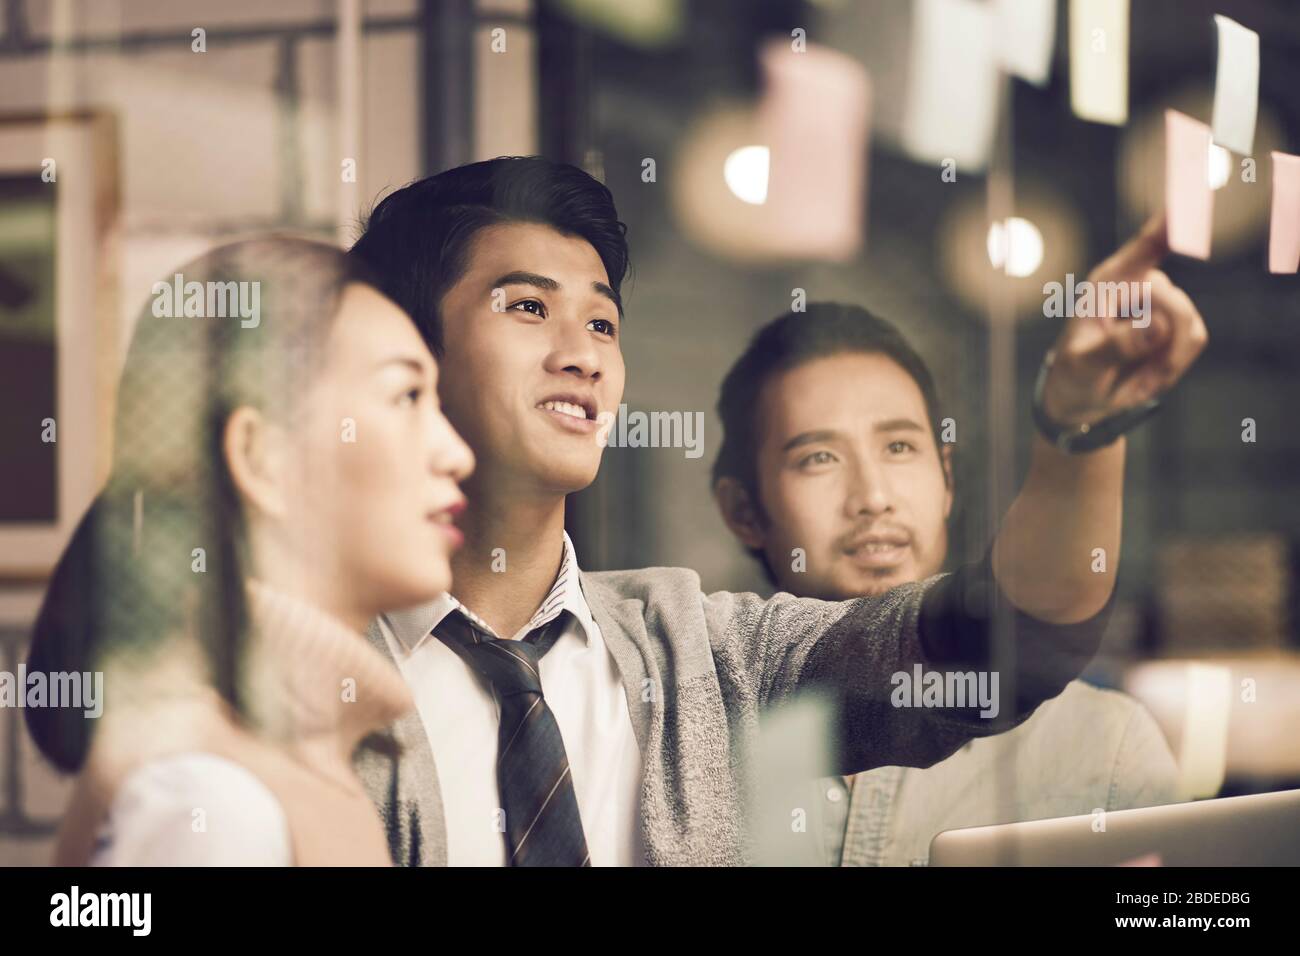 three asian small company businesspeople young entrepreneurs meeing discussing in office using sticky notes Stock Photo